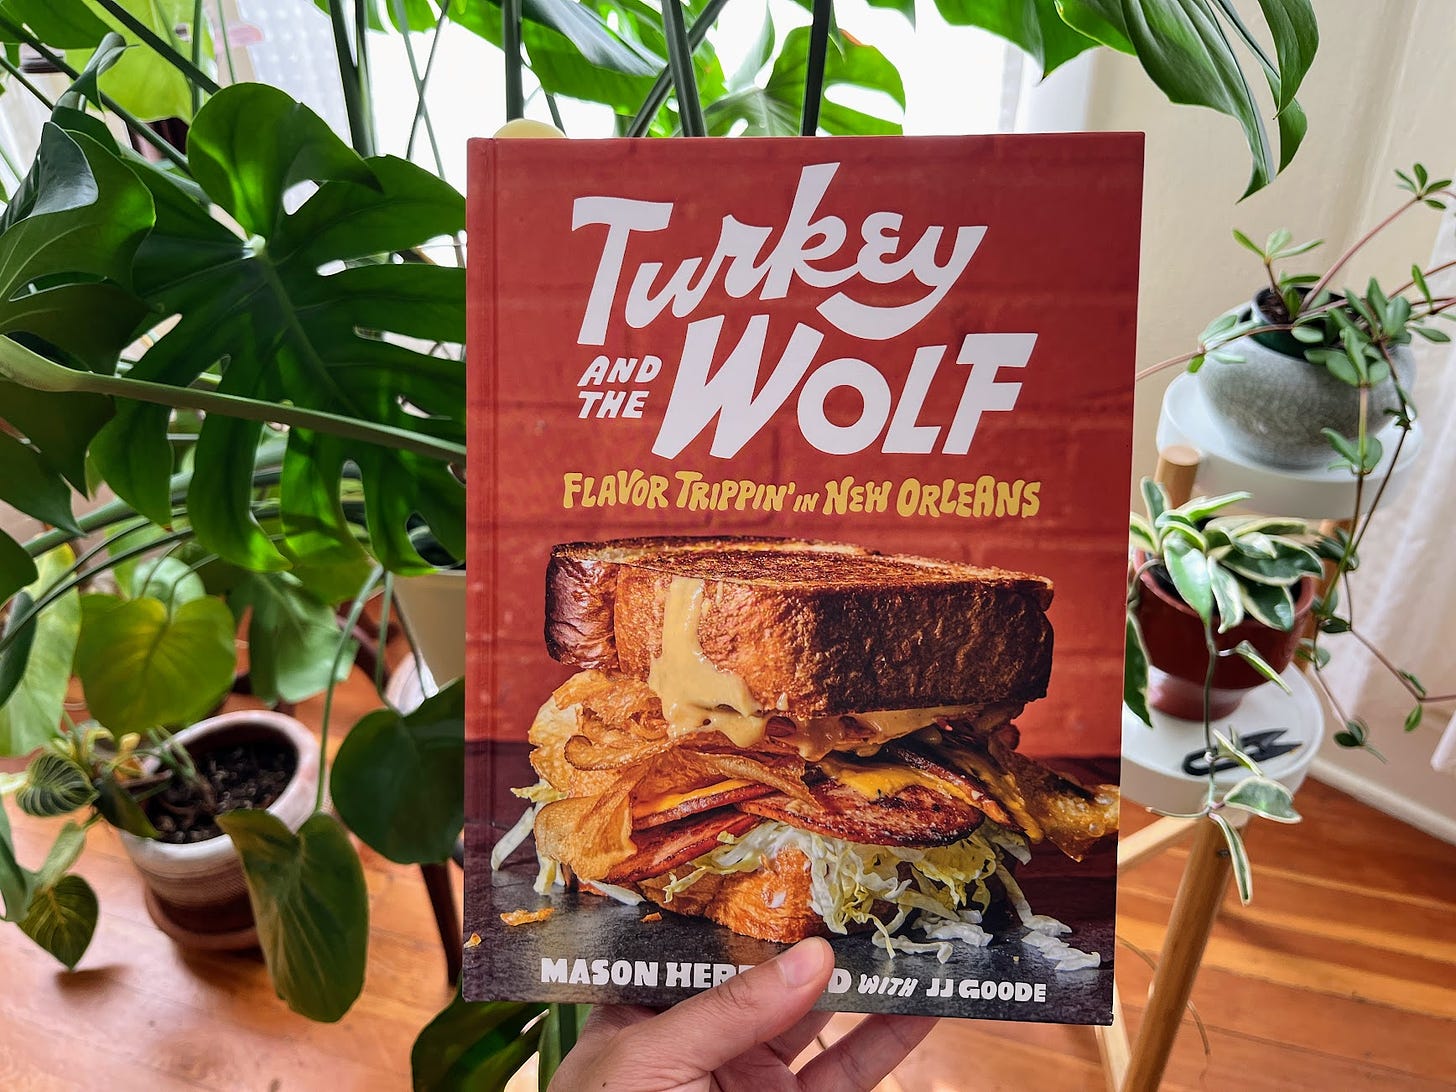 Hand holding Turkey and the Wolf cook book